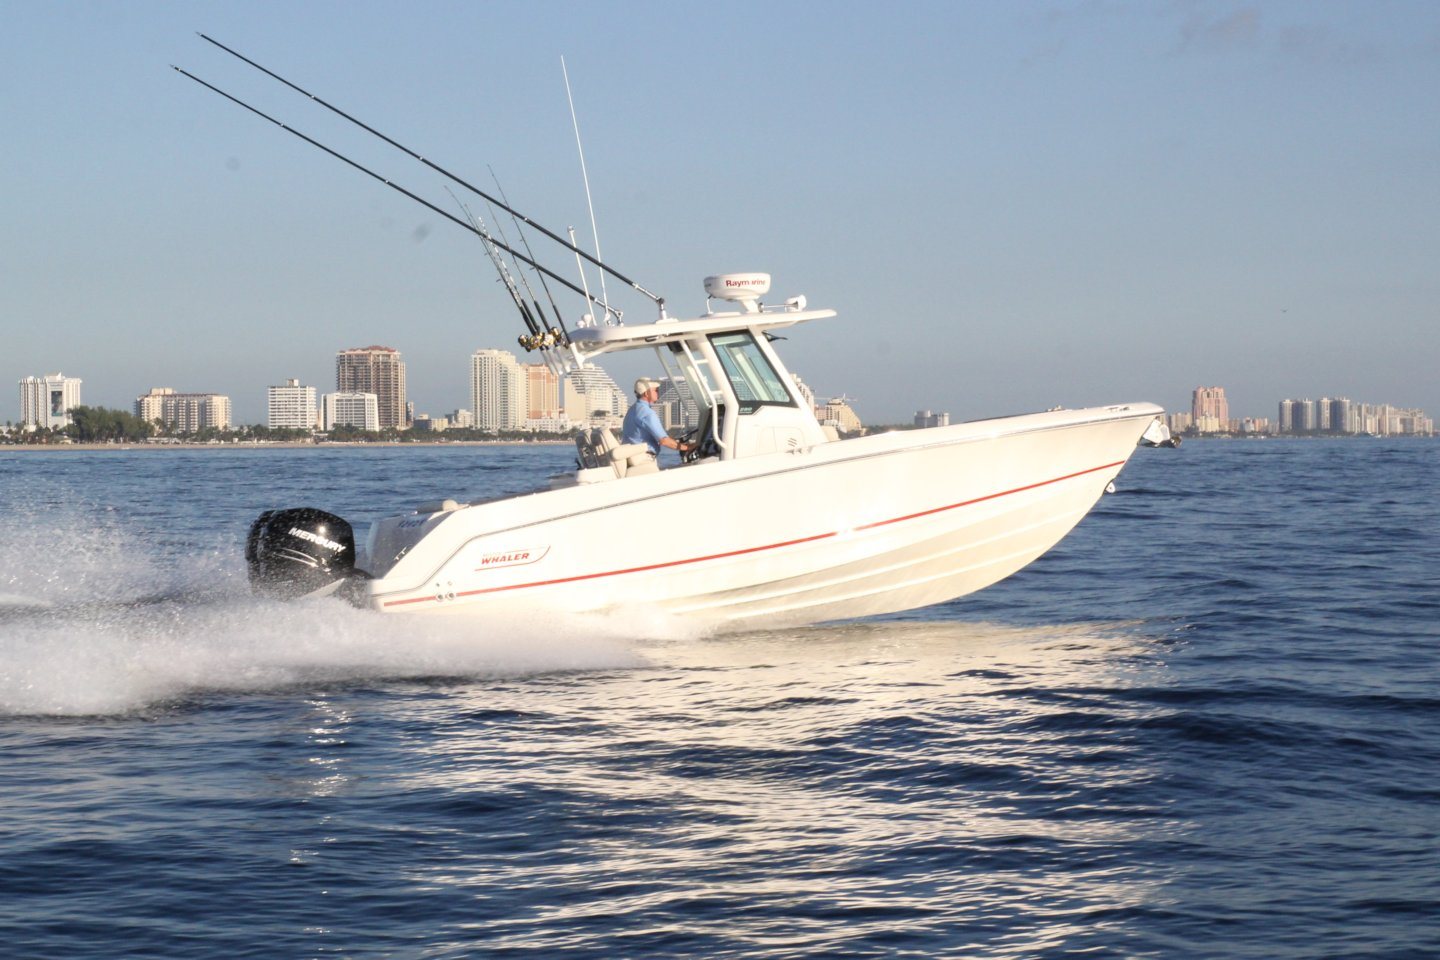 360 VR Virtual Tours of the Boston Whaler 280 Outrage